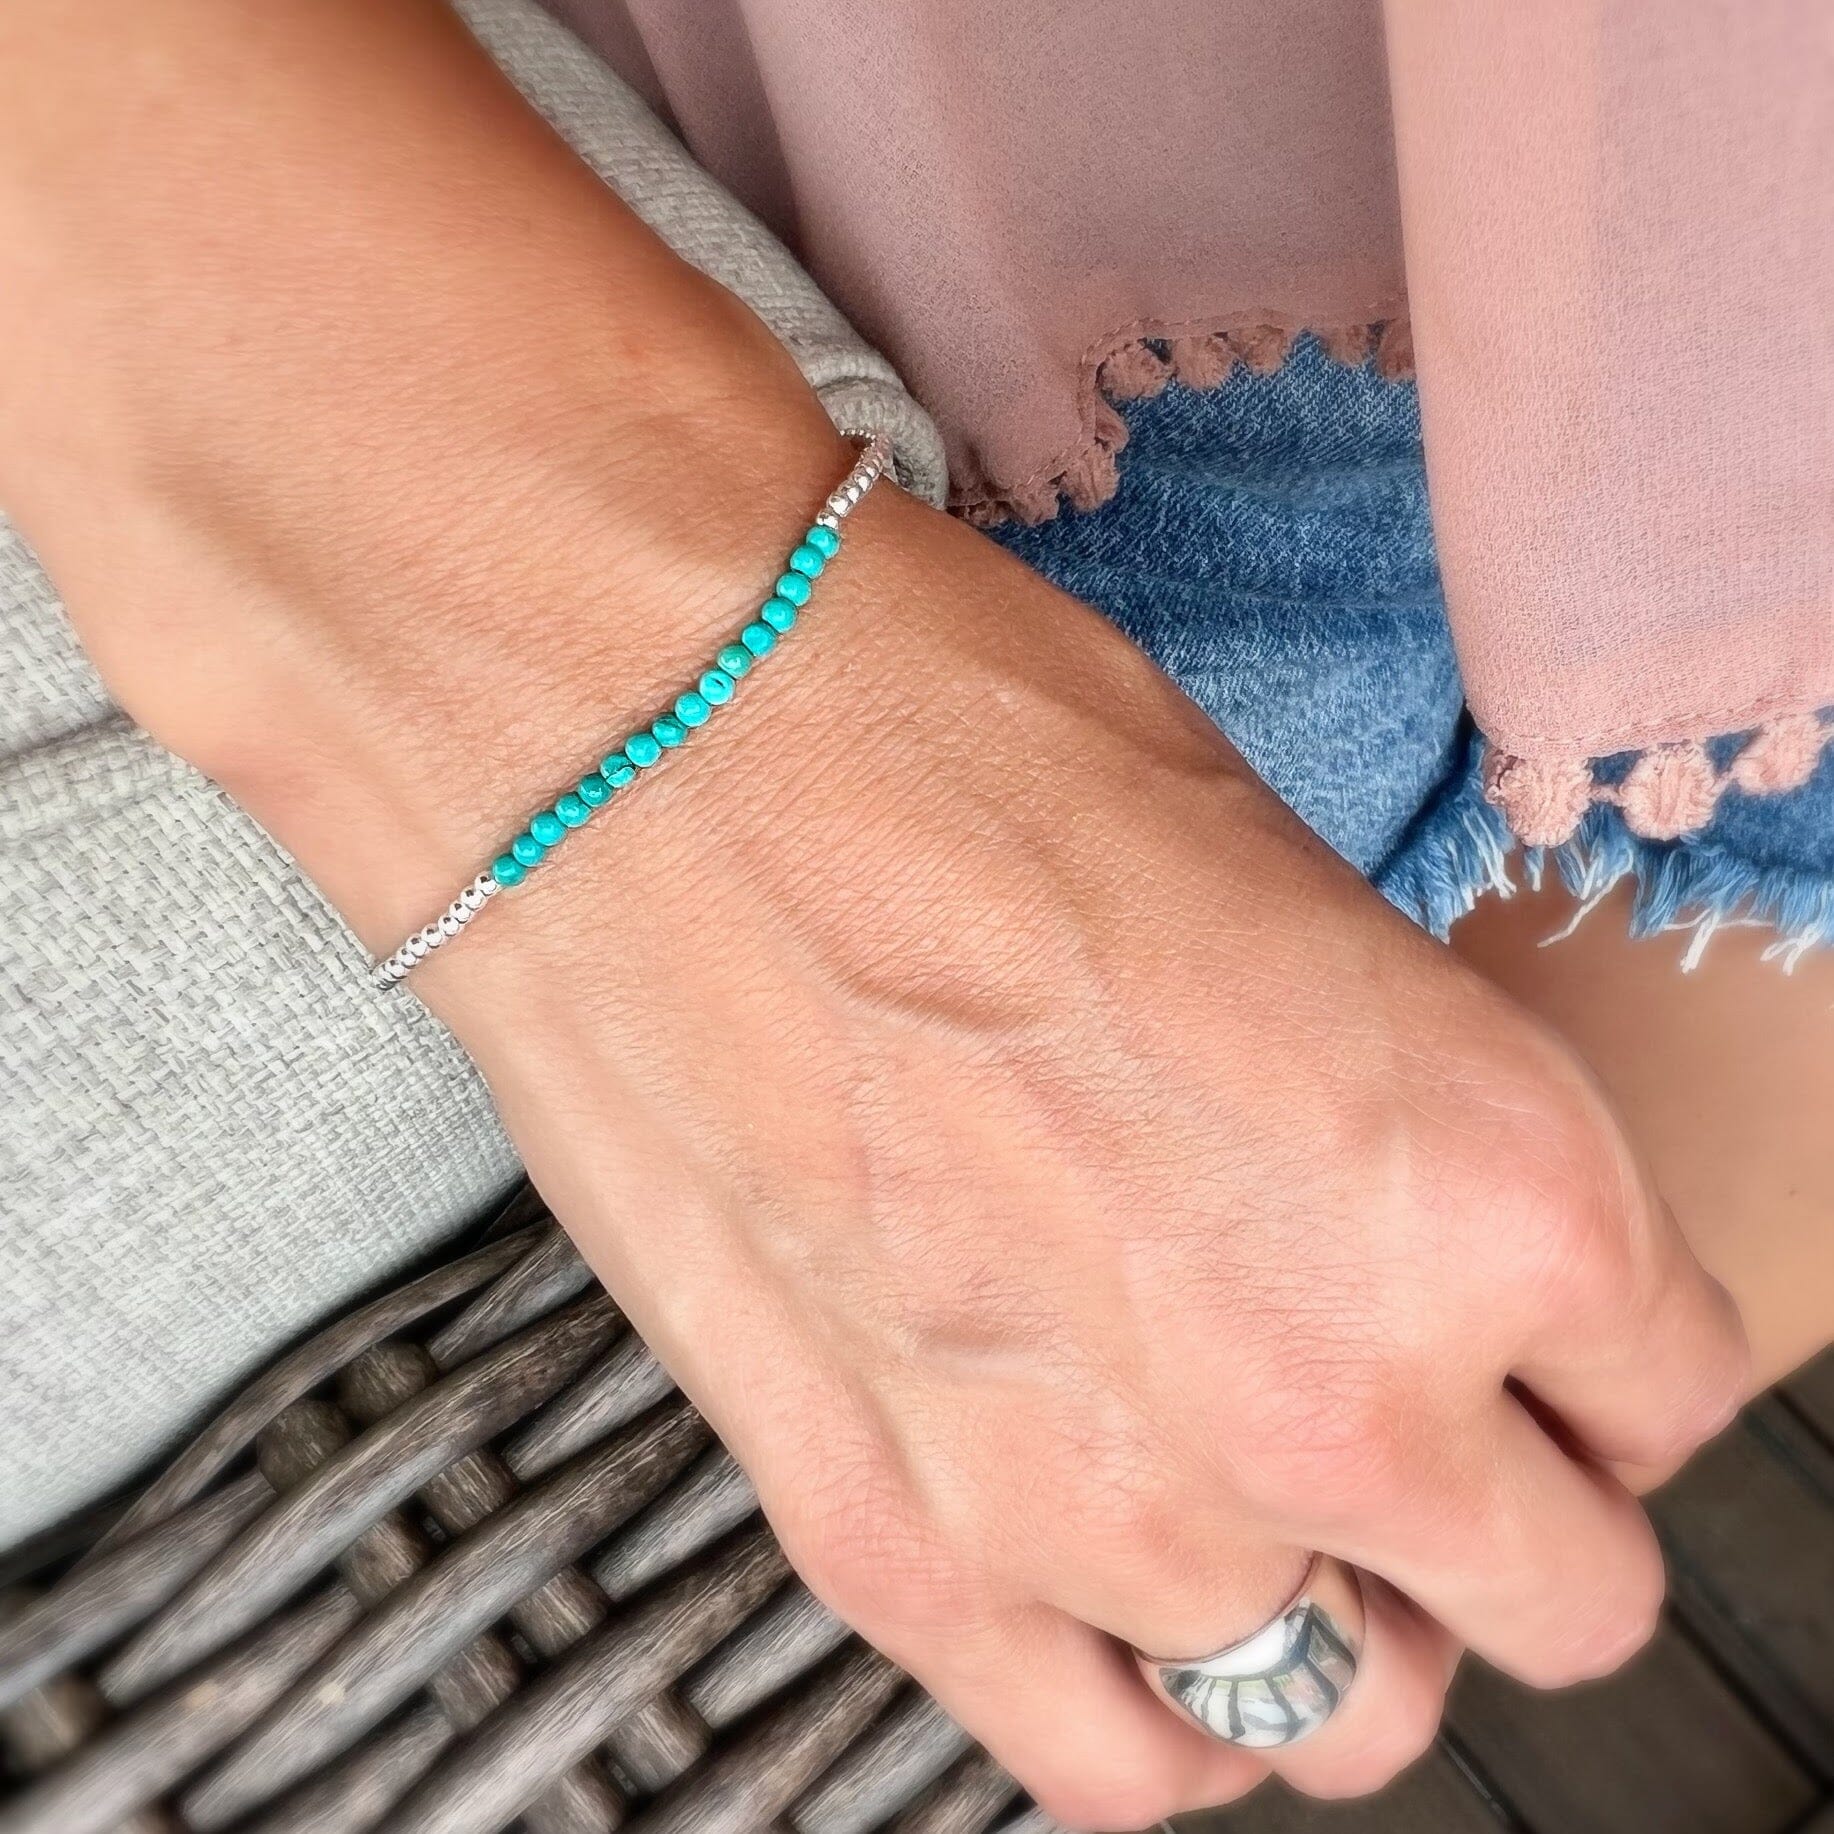 Turquoise Bead bracelet worn with Classic Dome ring